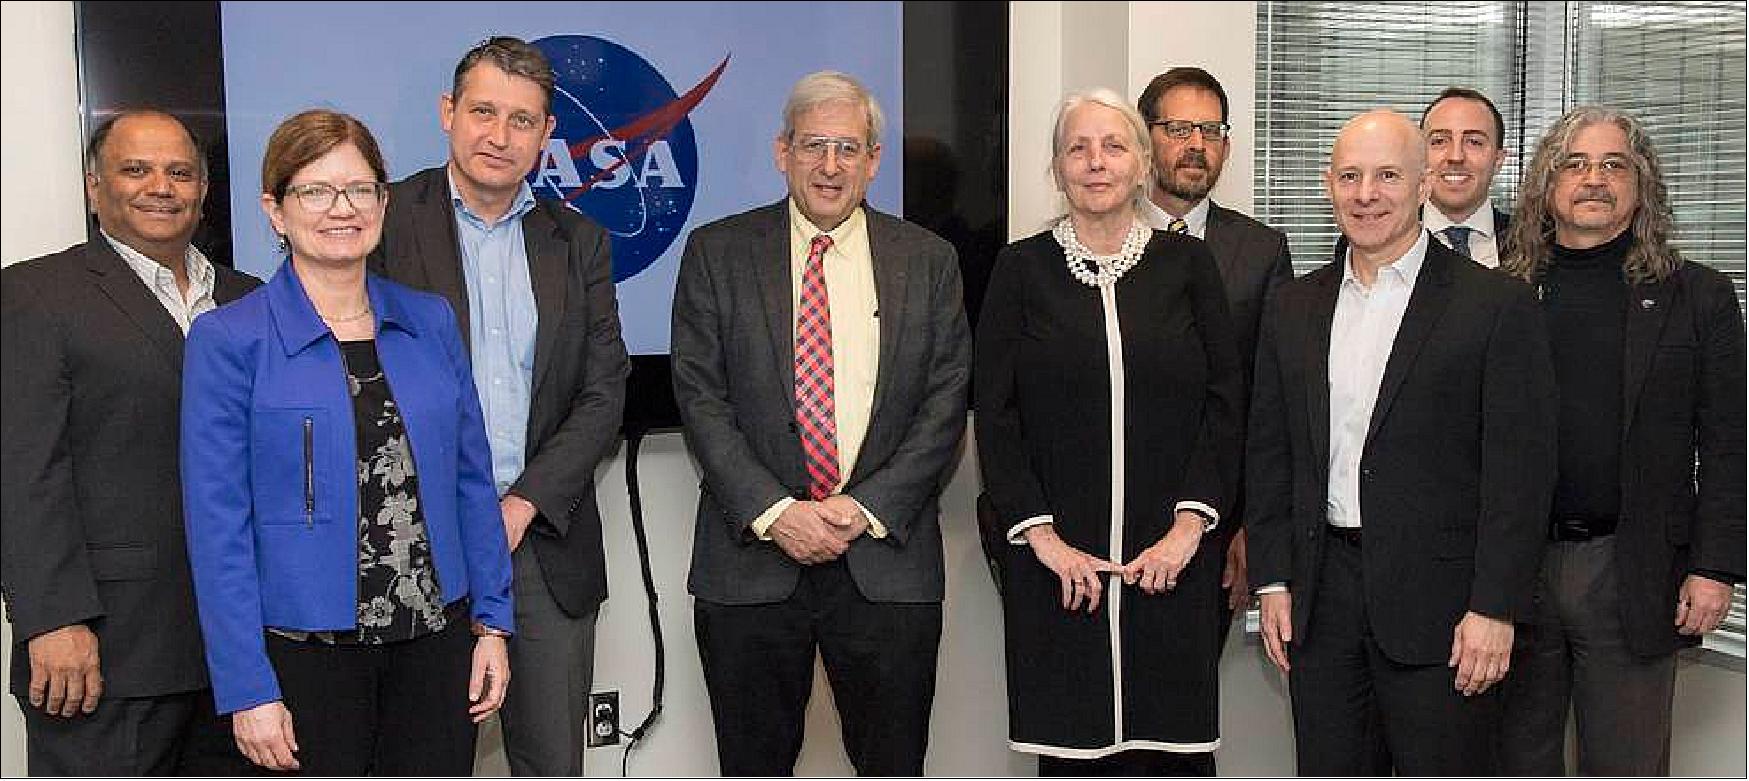 Figure 3: From left: Ashutosh Limaye, NASA Marshall Space Flight Center; Nancy Searby, NASA Headquarters Earth Science Division; Freek van der Meer, University of Twente Faculty of Geo-Information Science and Earth Observation; Michael Freilich, NASA Headquarters Earth Science Division; Erna Leurink, University of Twente Faculty of Geo-Information Science and Earth Observation; Lawrence Friedl, NASA Headquarters Earth Science Division; Dan Irwin, NASA Marshall; Andy Parks, NASA Headquarters Office of International and Interagency Relations; Ray French, NASA Marshall (image credit: NASA)